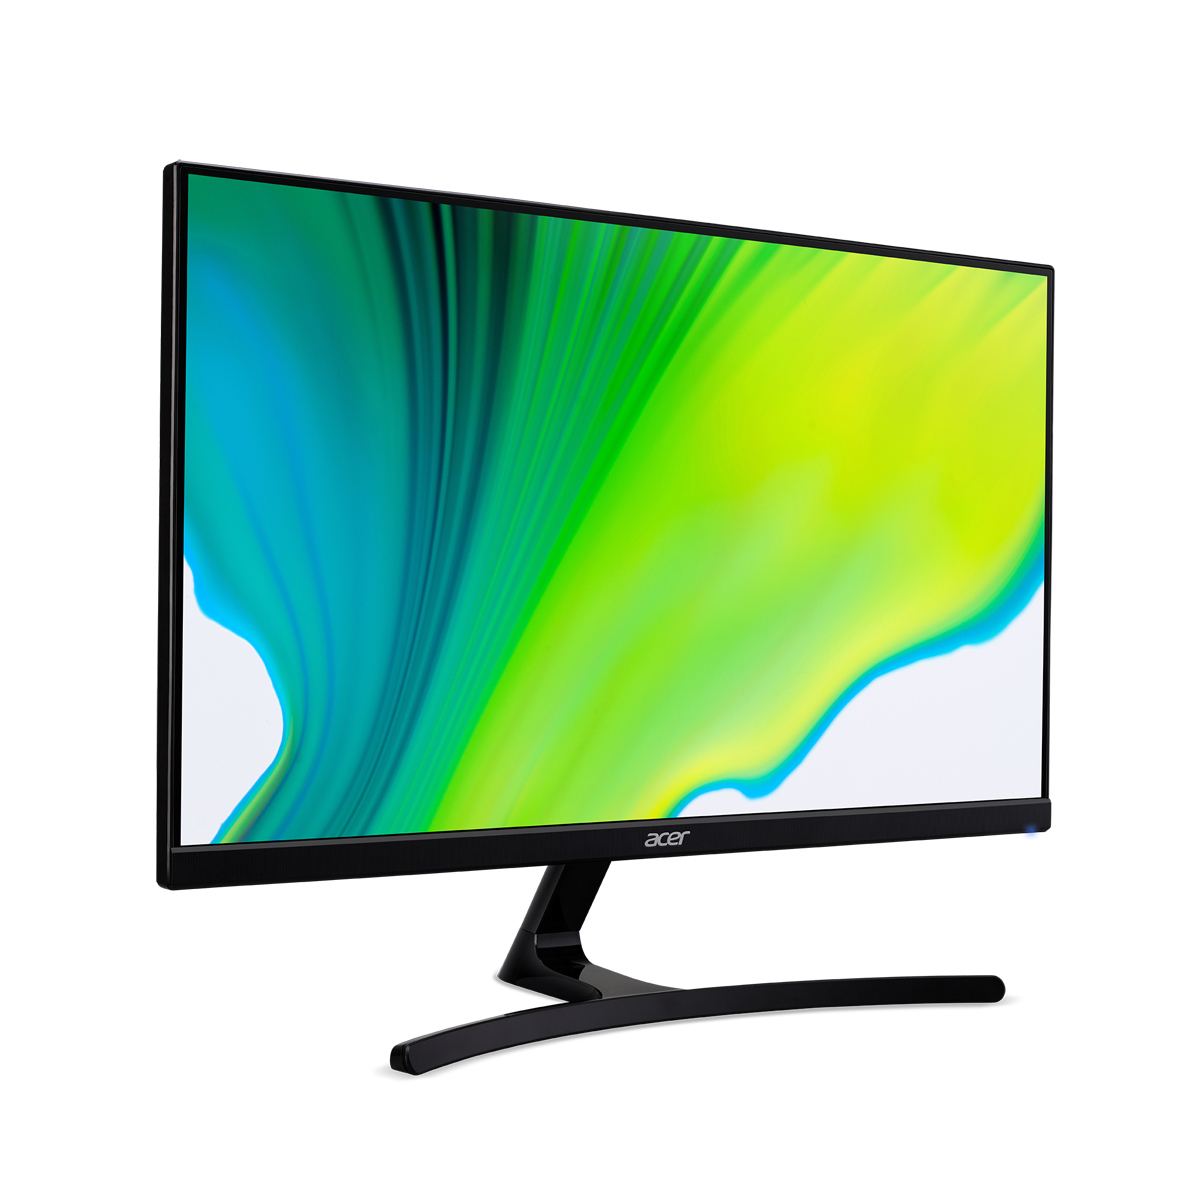 Acer K3 (K243YEbmix) 23,8" Full-HD Office Monitor 68,6cm (27"), 350 Nits, HDMI, DP, USB, RJ45, Audio In/Out von Acer